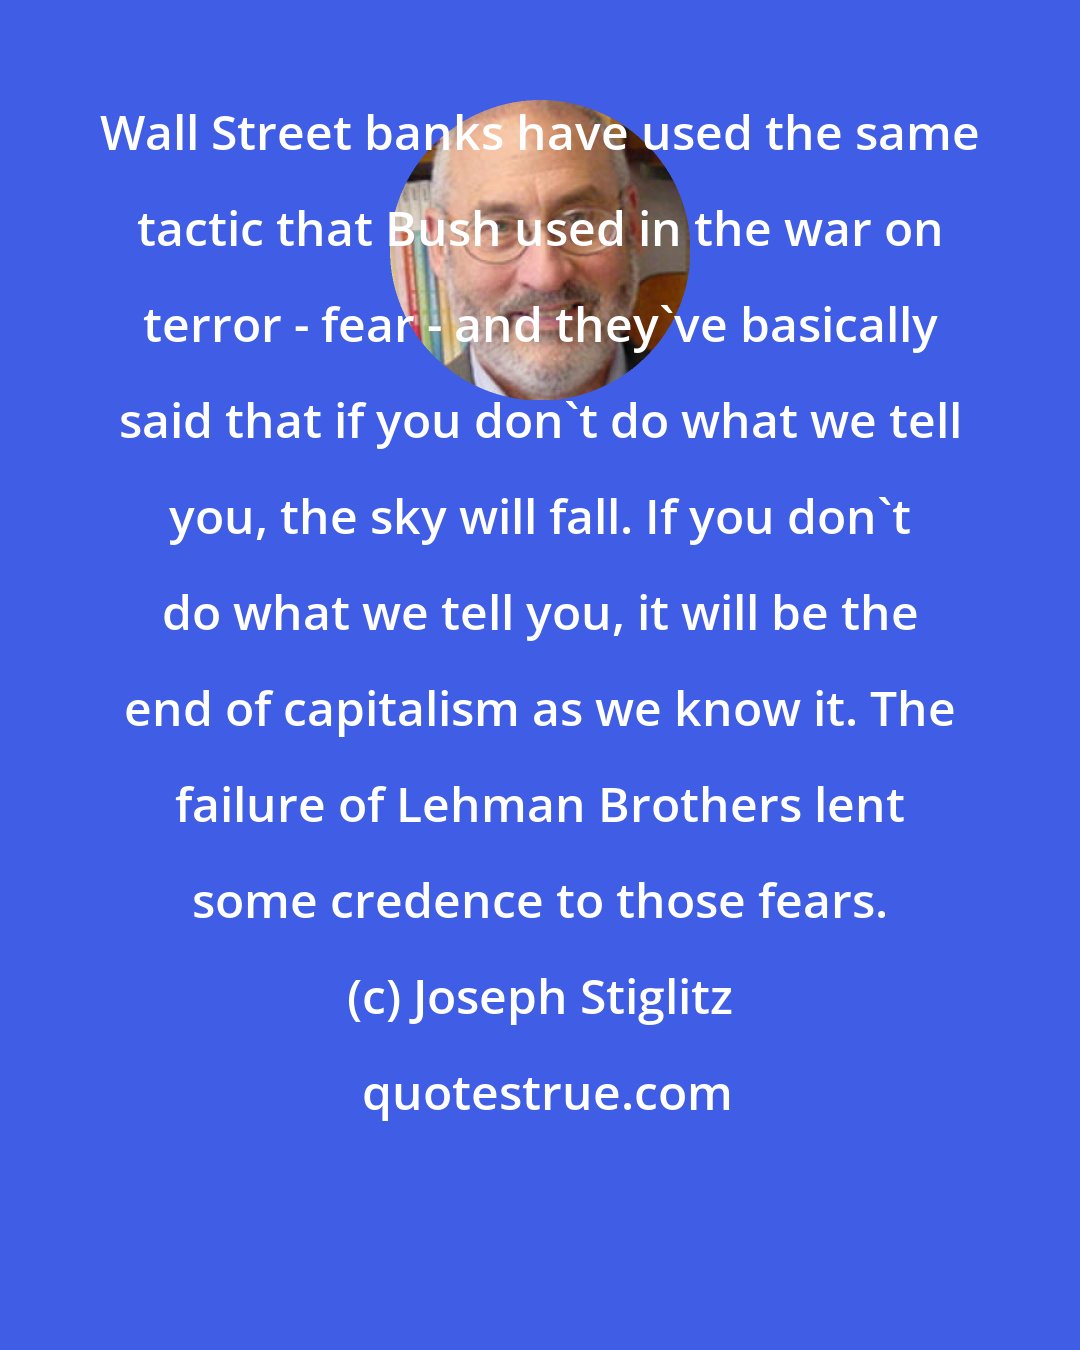 Joseph Stiglitz: Wall Street banks have used the same tactic that Bush used in the war on terror - fear - and they've basically said that if you don't do what we tell you, the sky will fall. If you don't do what we tell you, it will be the end of capitalism as we know it. The failure of Lehman Brothers lent some credence to those fears.